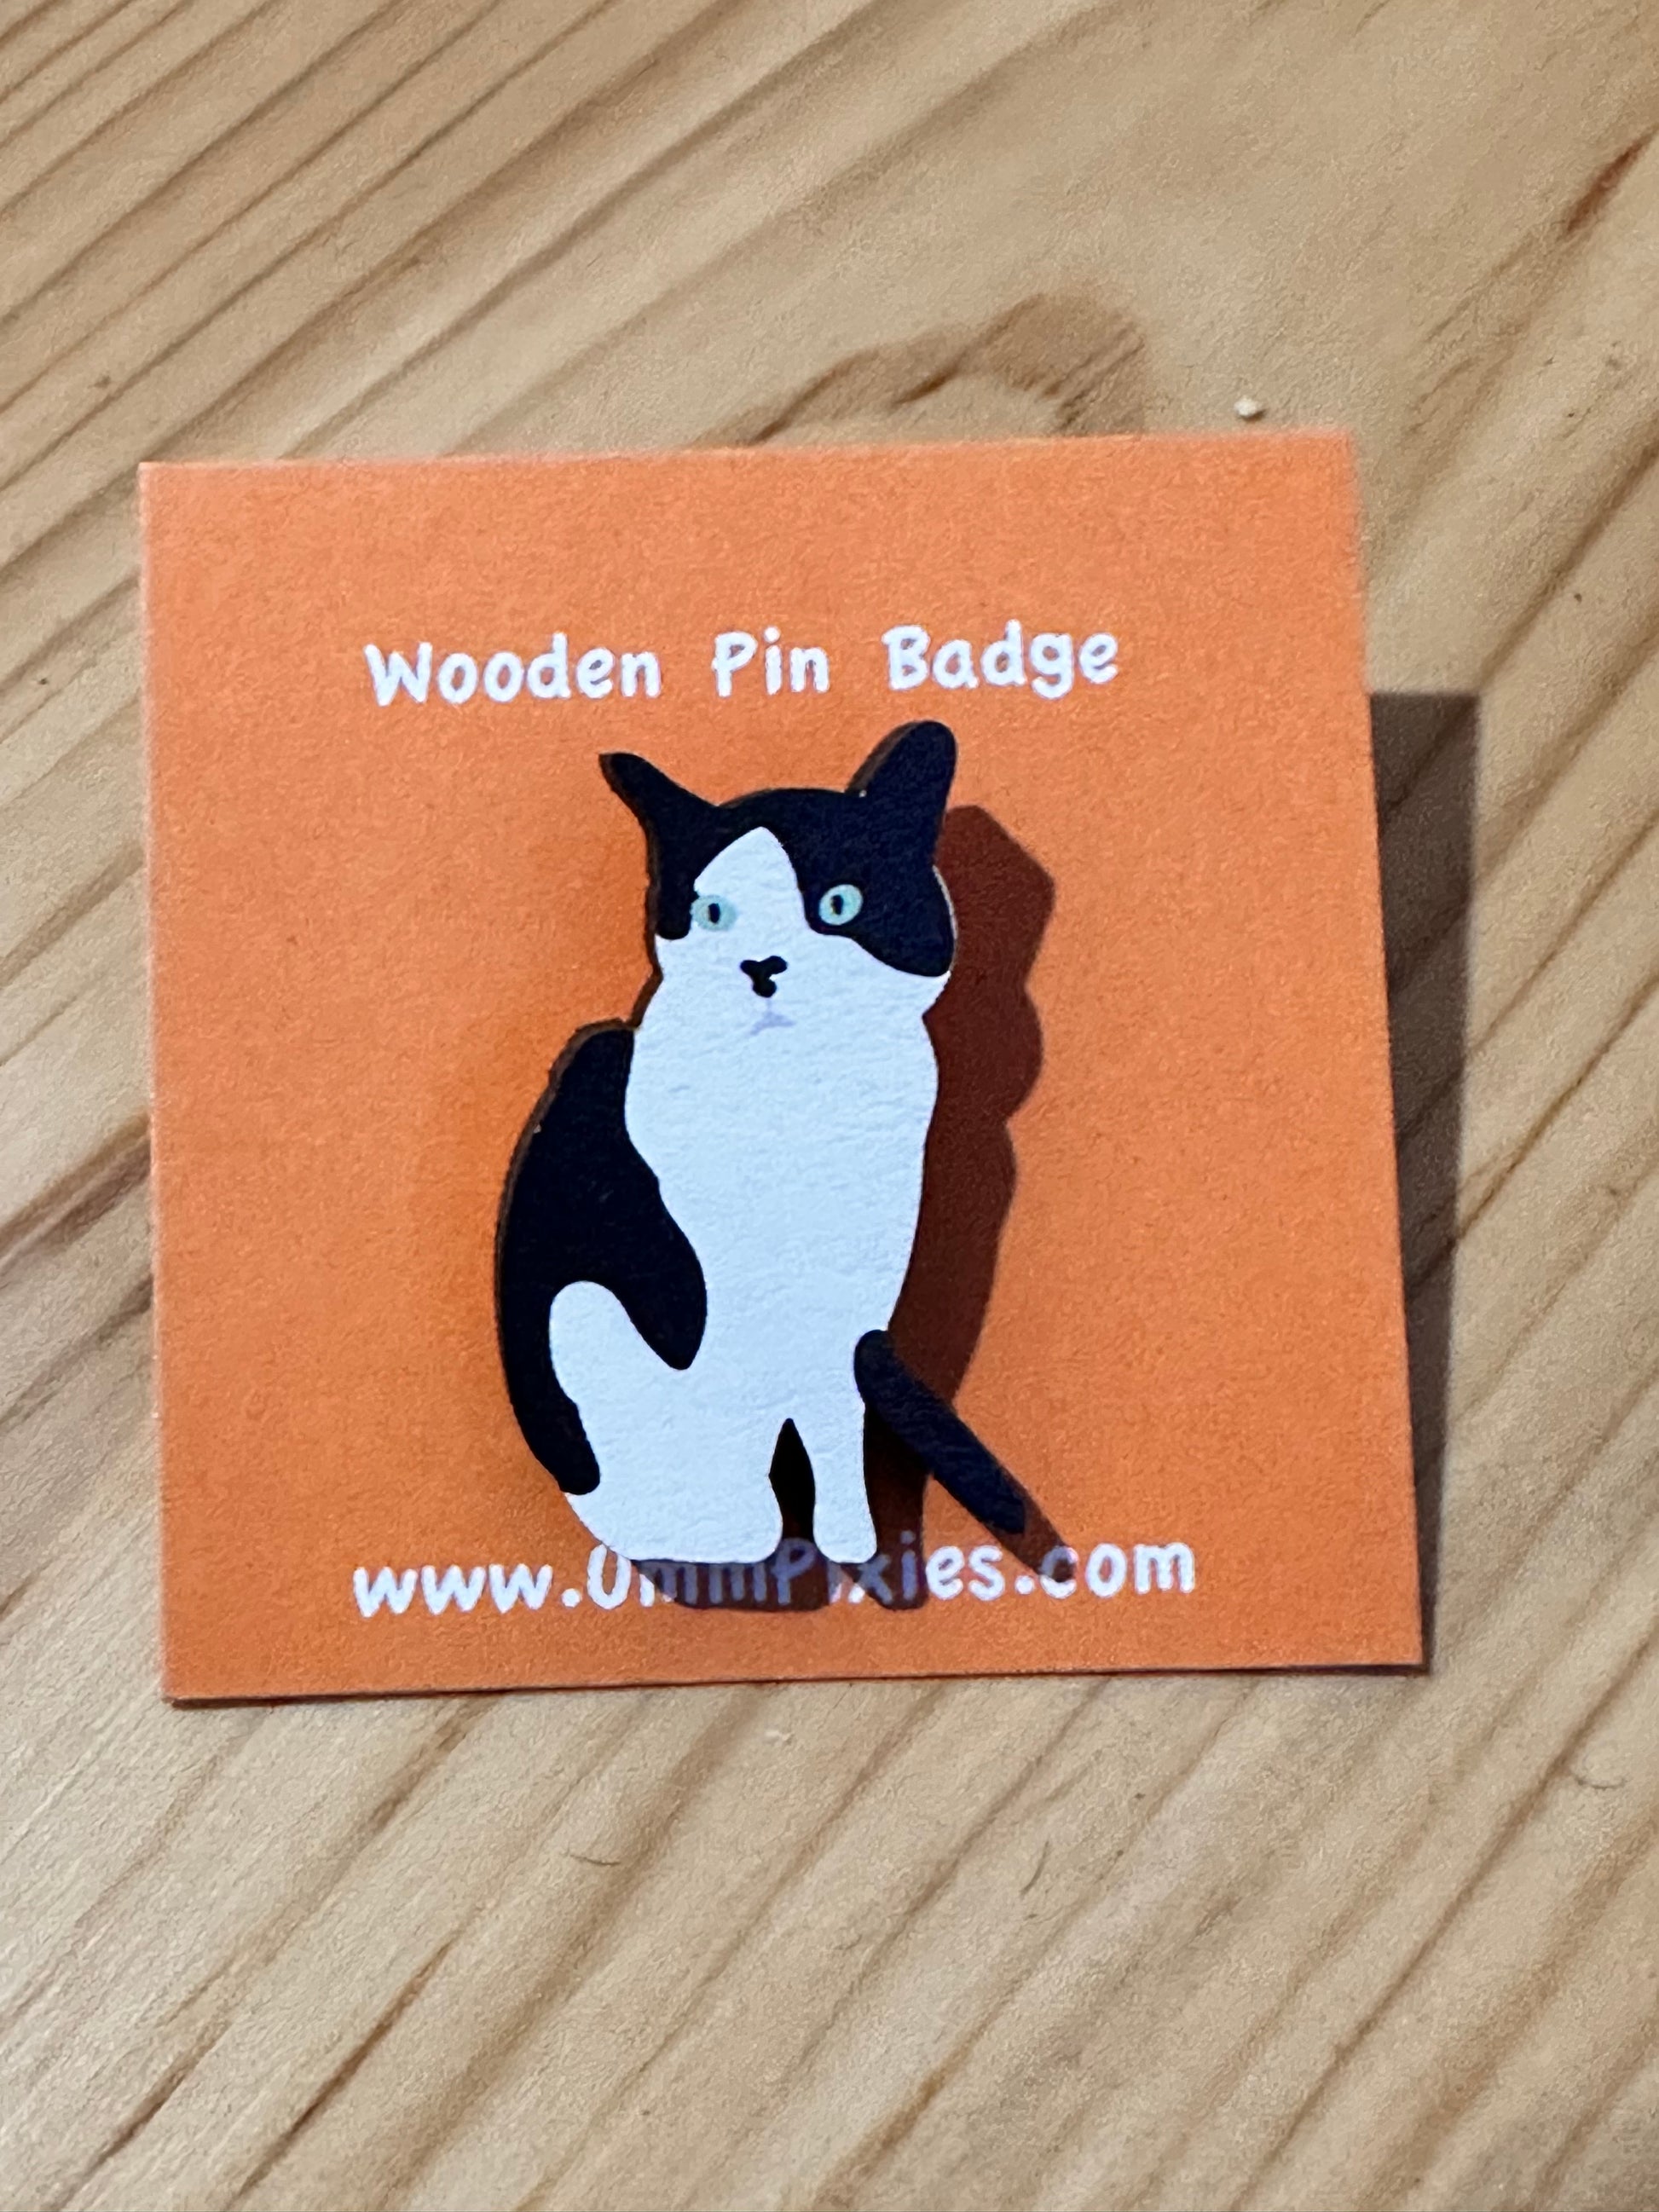 Black and White Tuxedo Cat  pin badge shown on display card